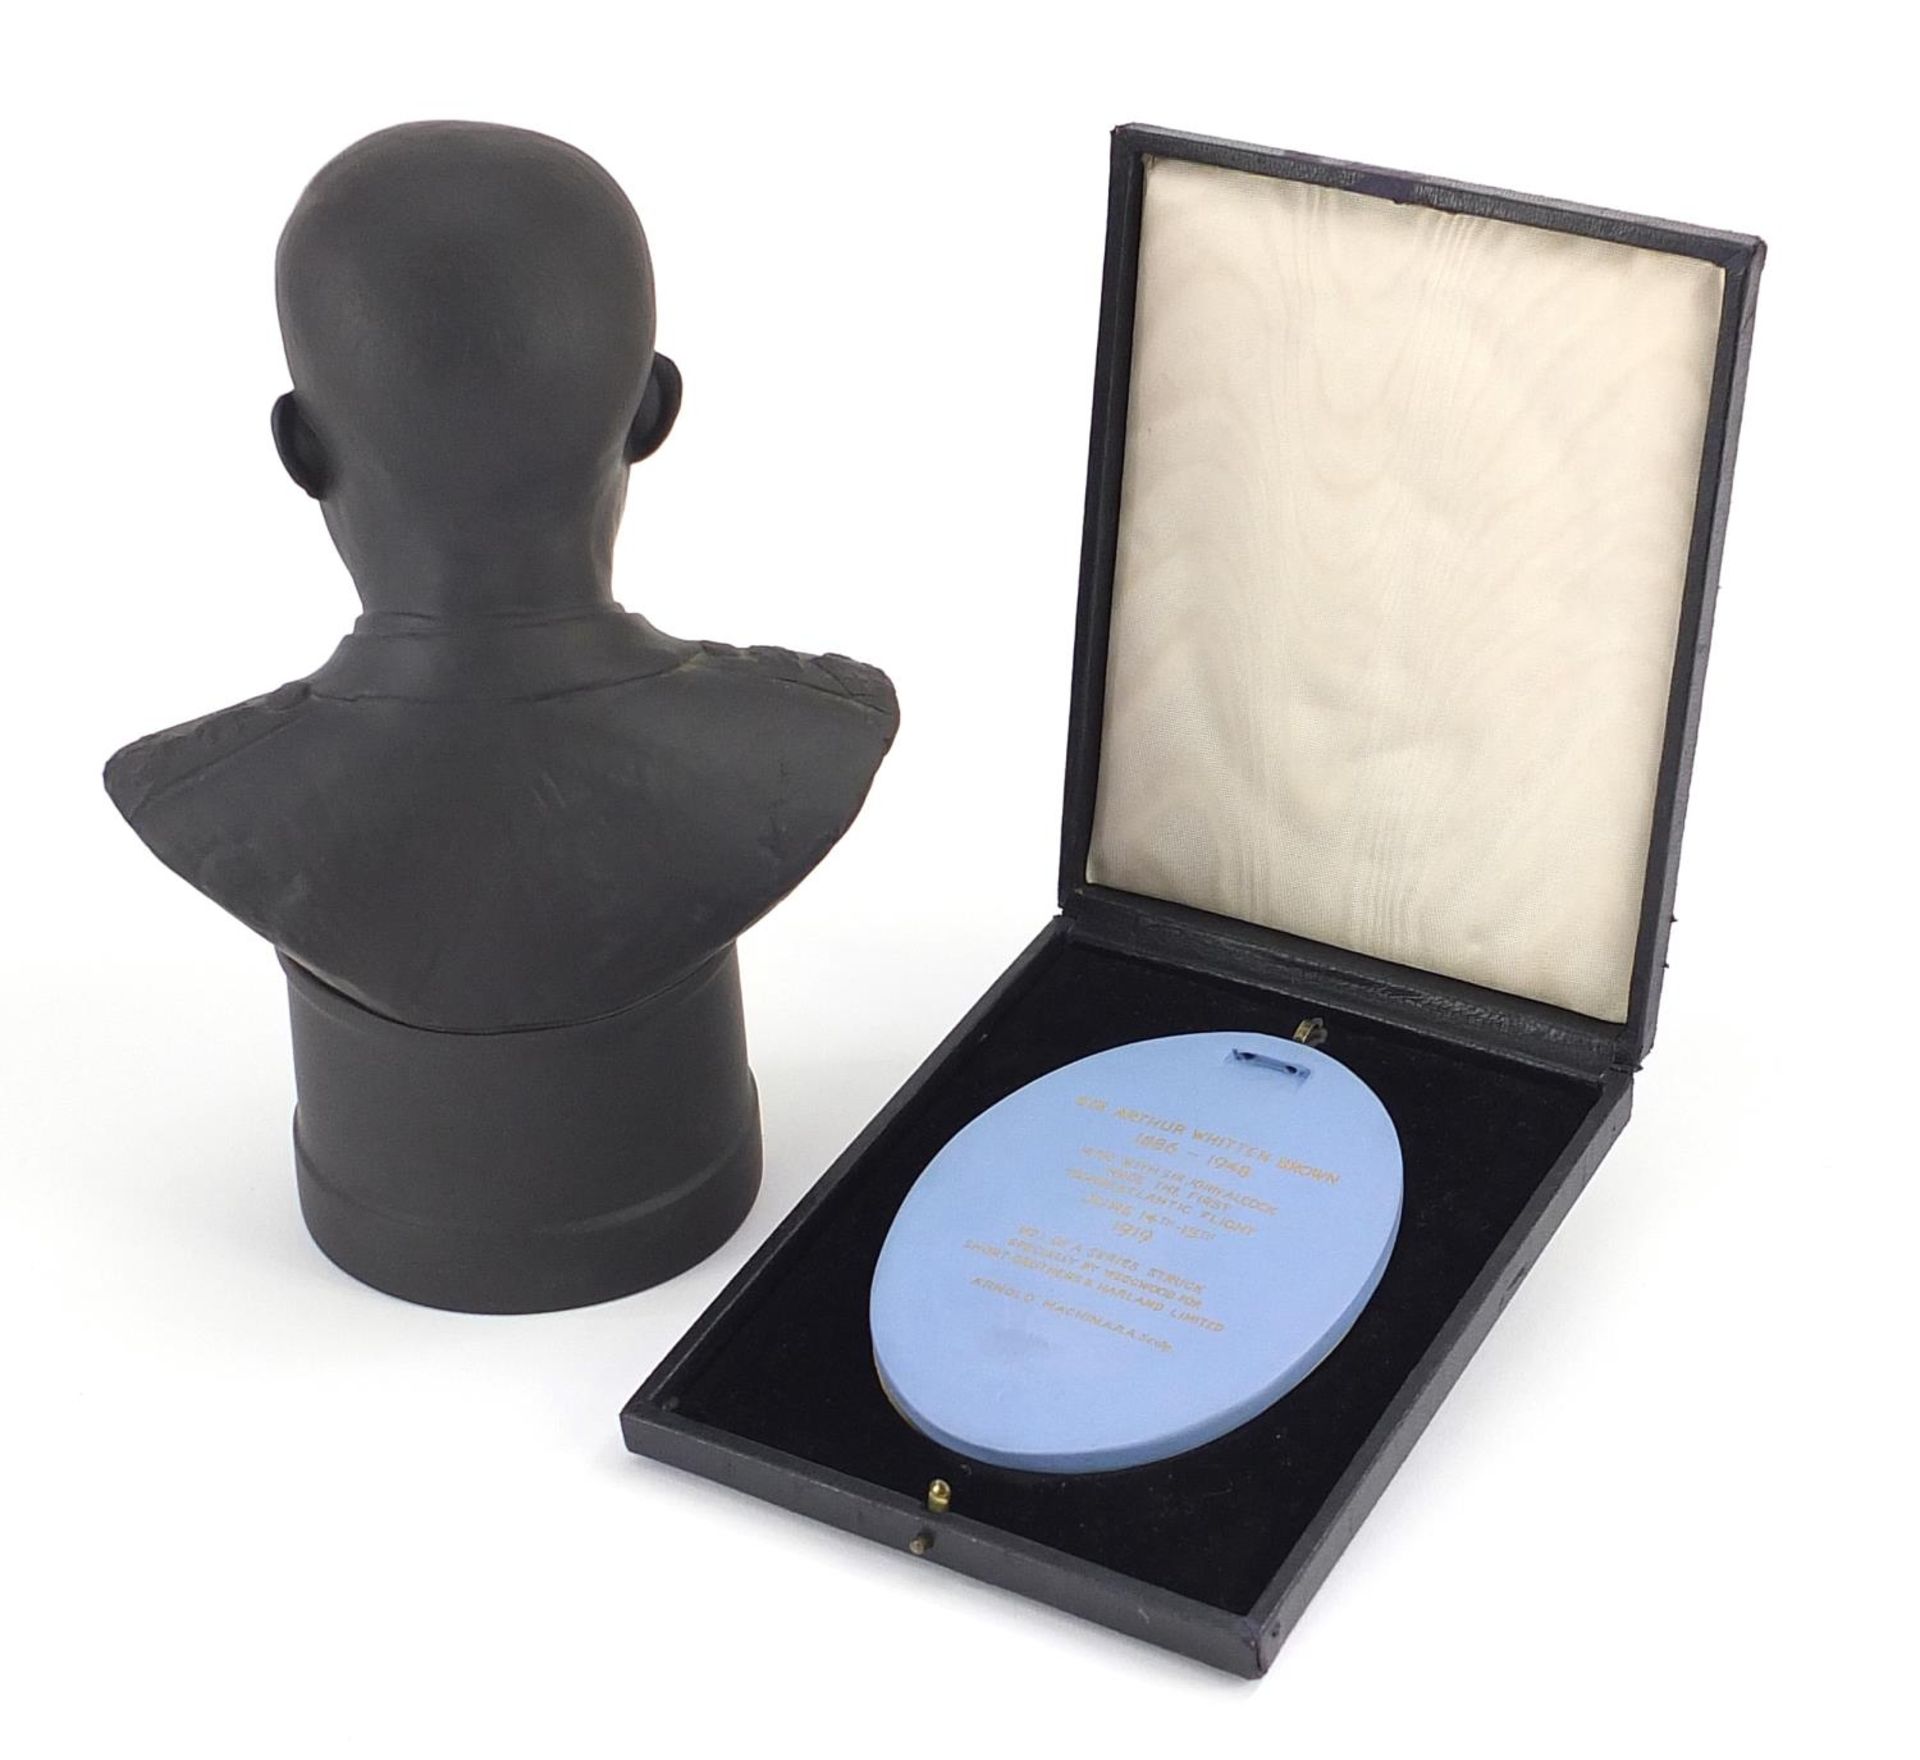 Wedgwood black basalt bust of Dwight D Eisenhower, limited edition 1307/5000, together with a - Image 3 of 7